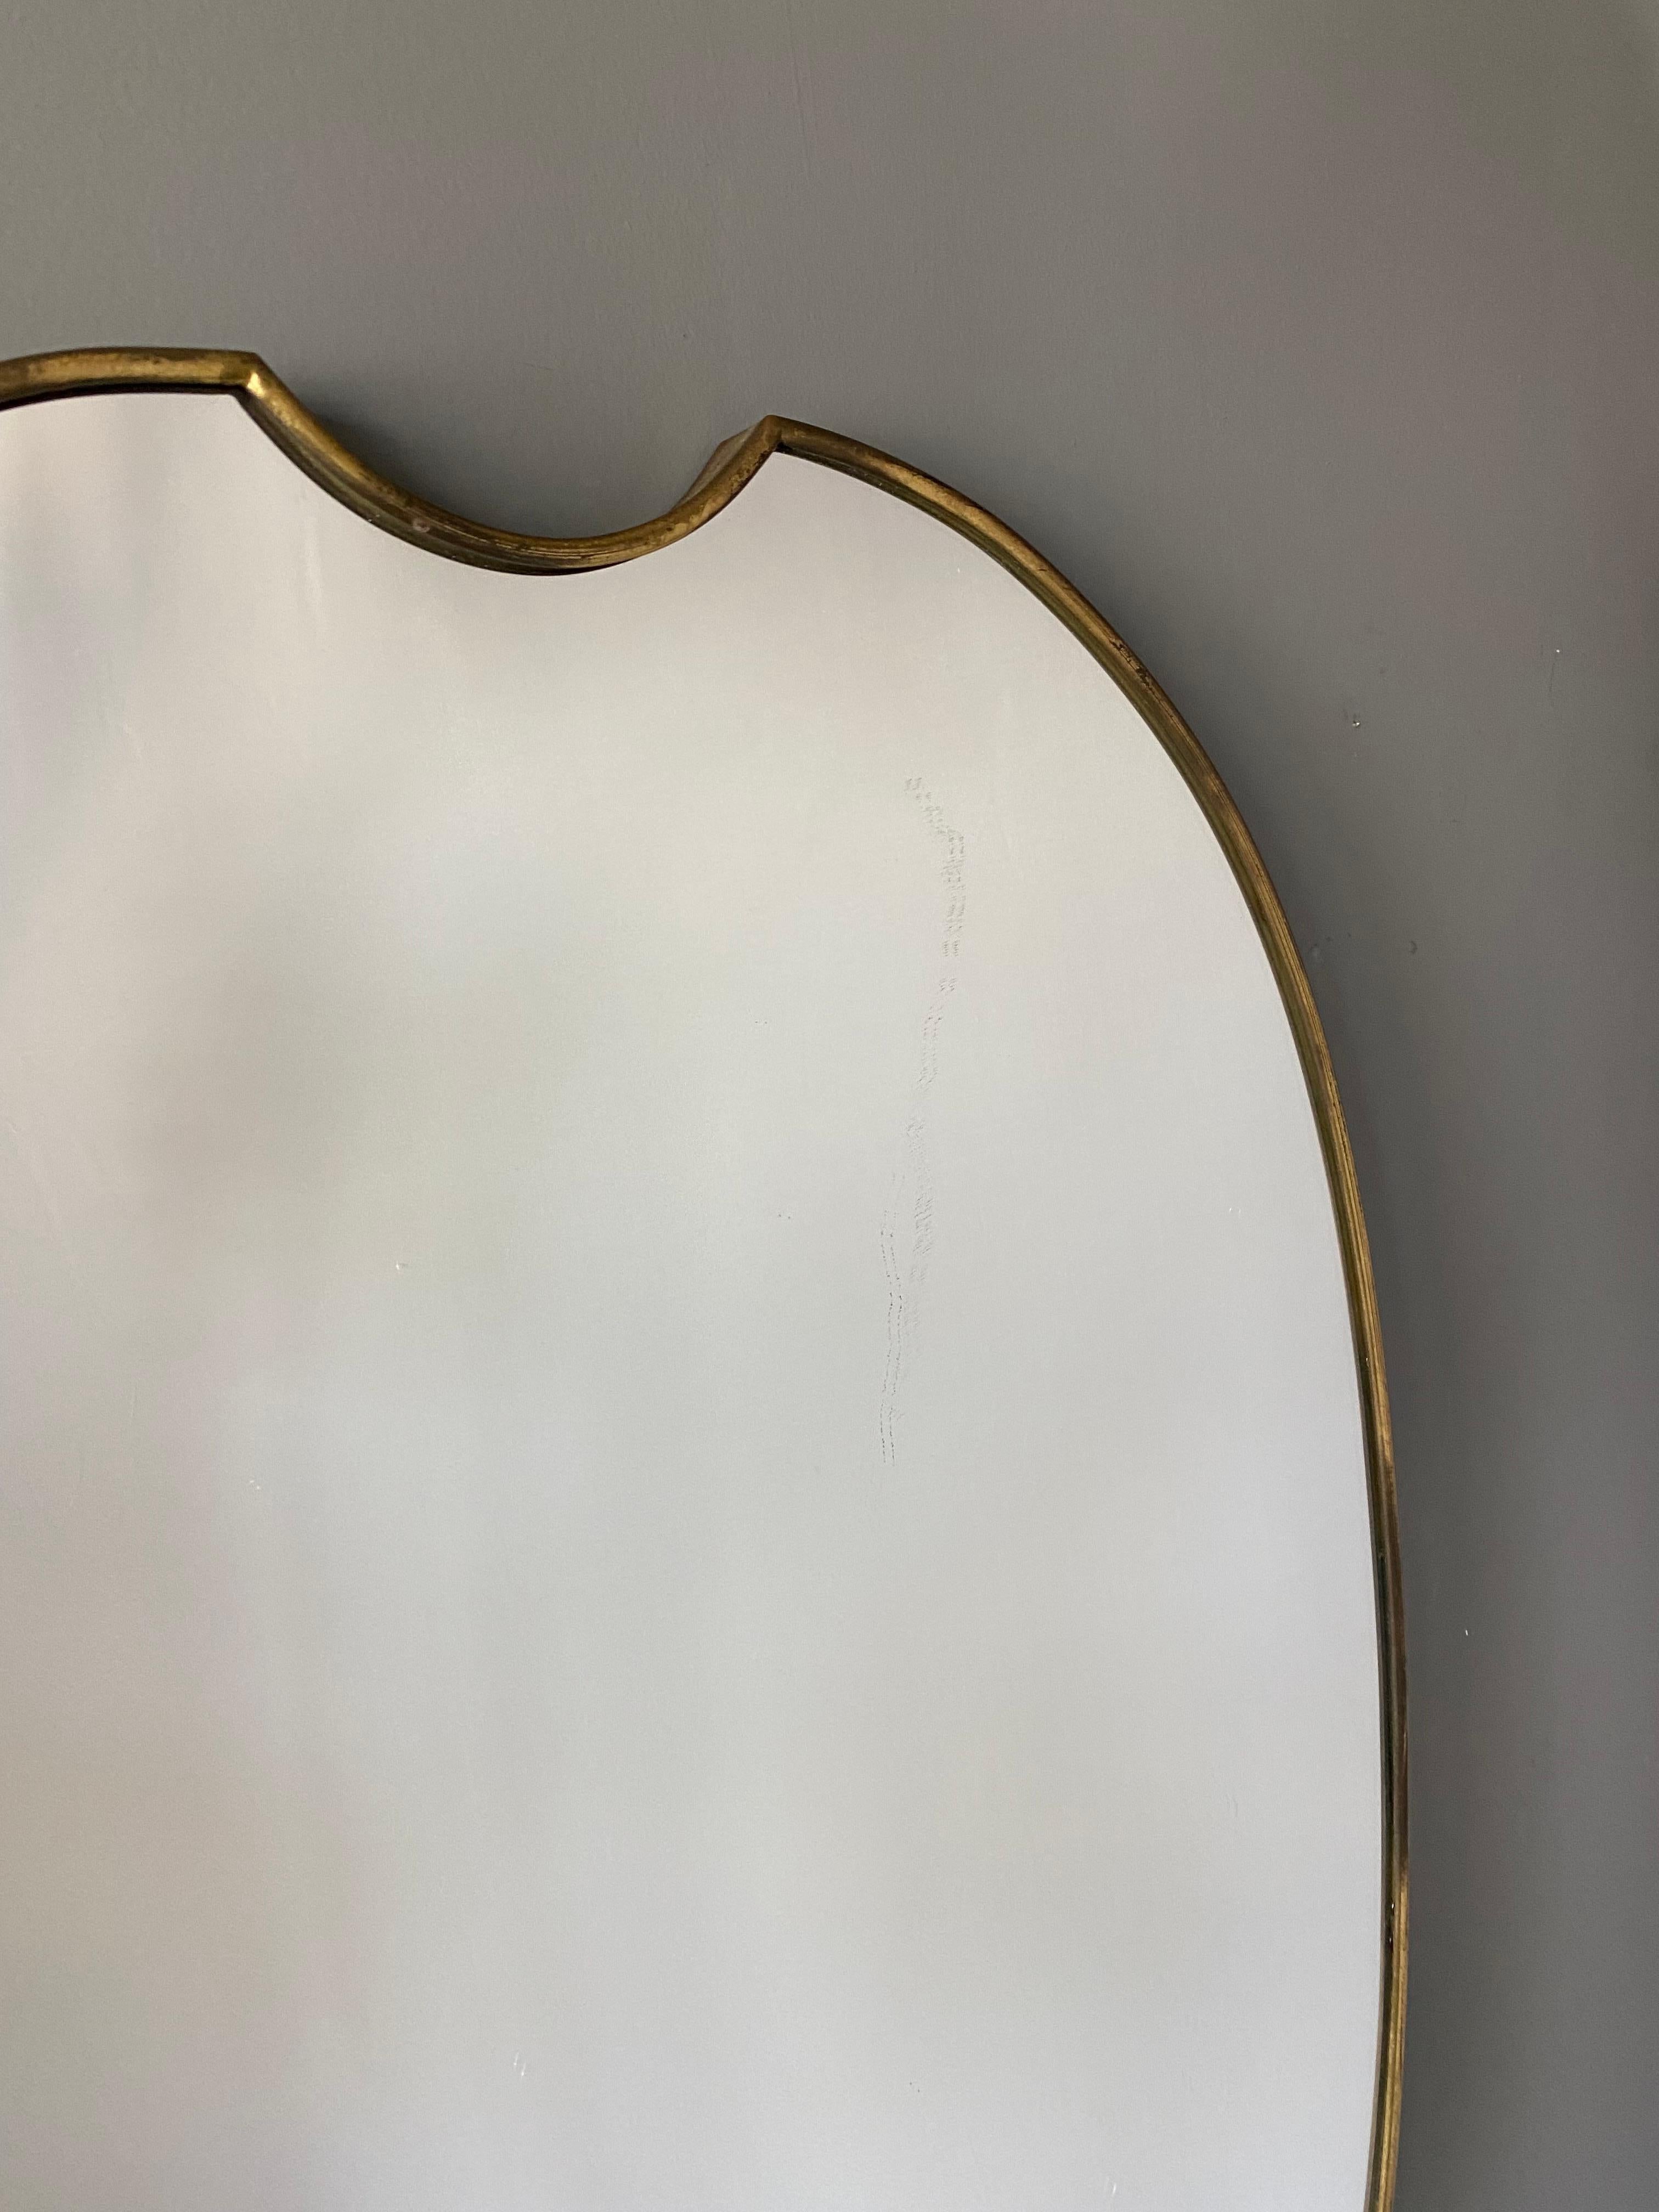 A large wall mirror, produced in Italy, 1940s-1950s. Cut mirror glass is framed in brass. 

Other designers of the period include Gio Ponti, Fontana Arte, Max Ingrand, Franco Albini, and Josef Frank.